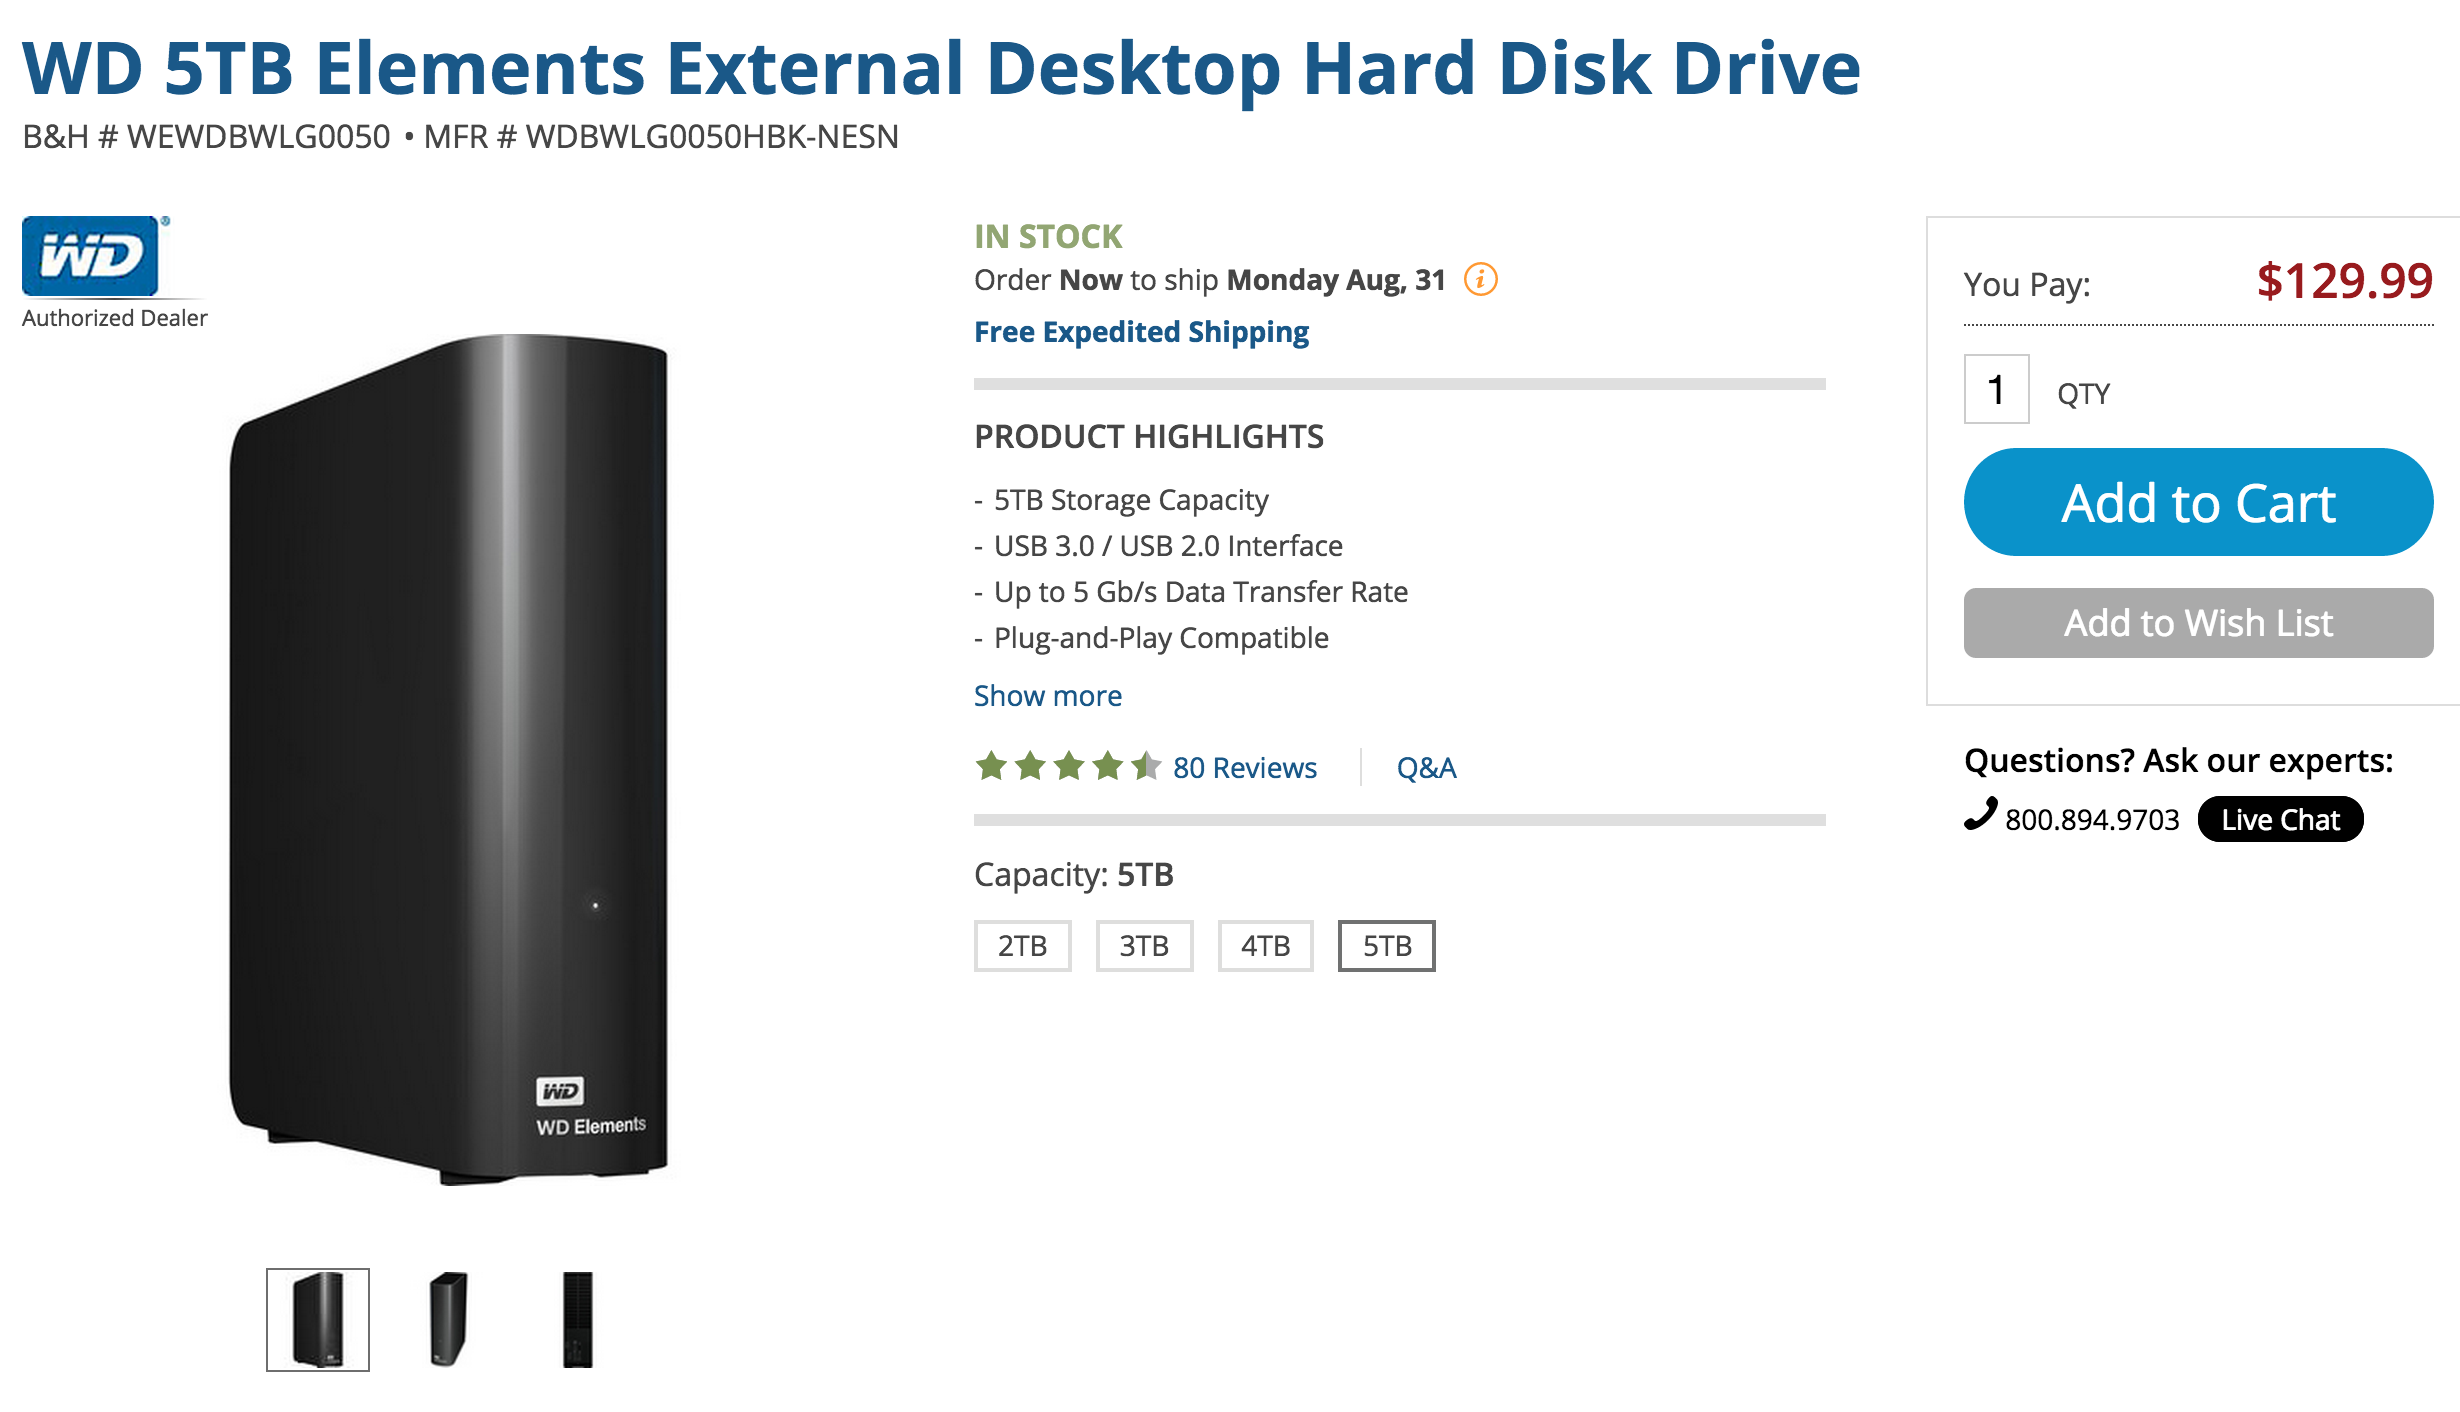 wd-elements-5tb-bh-deal